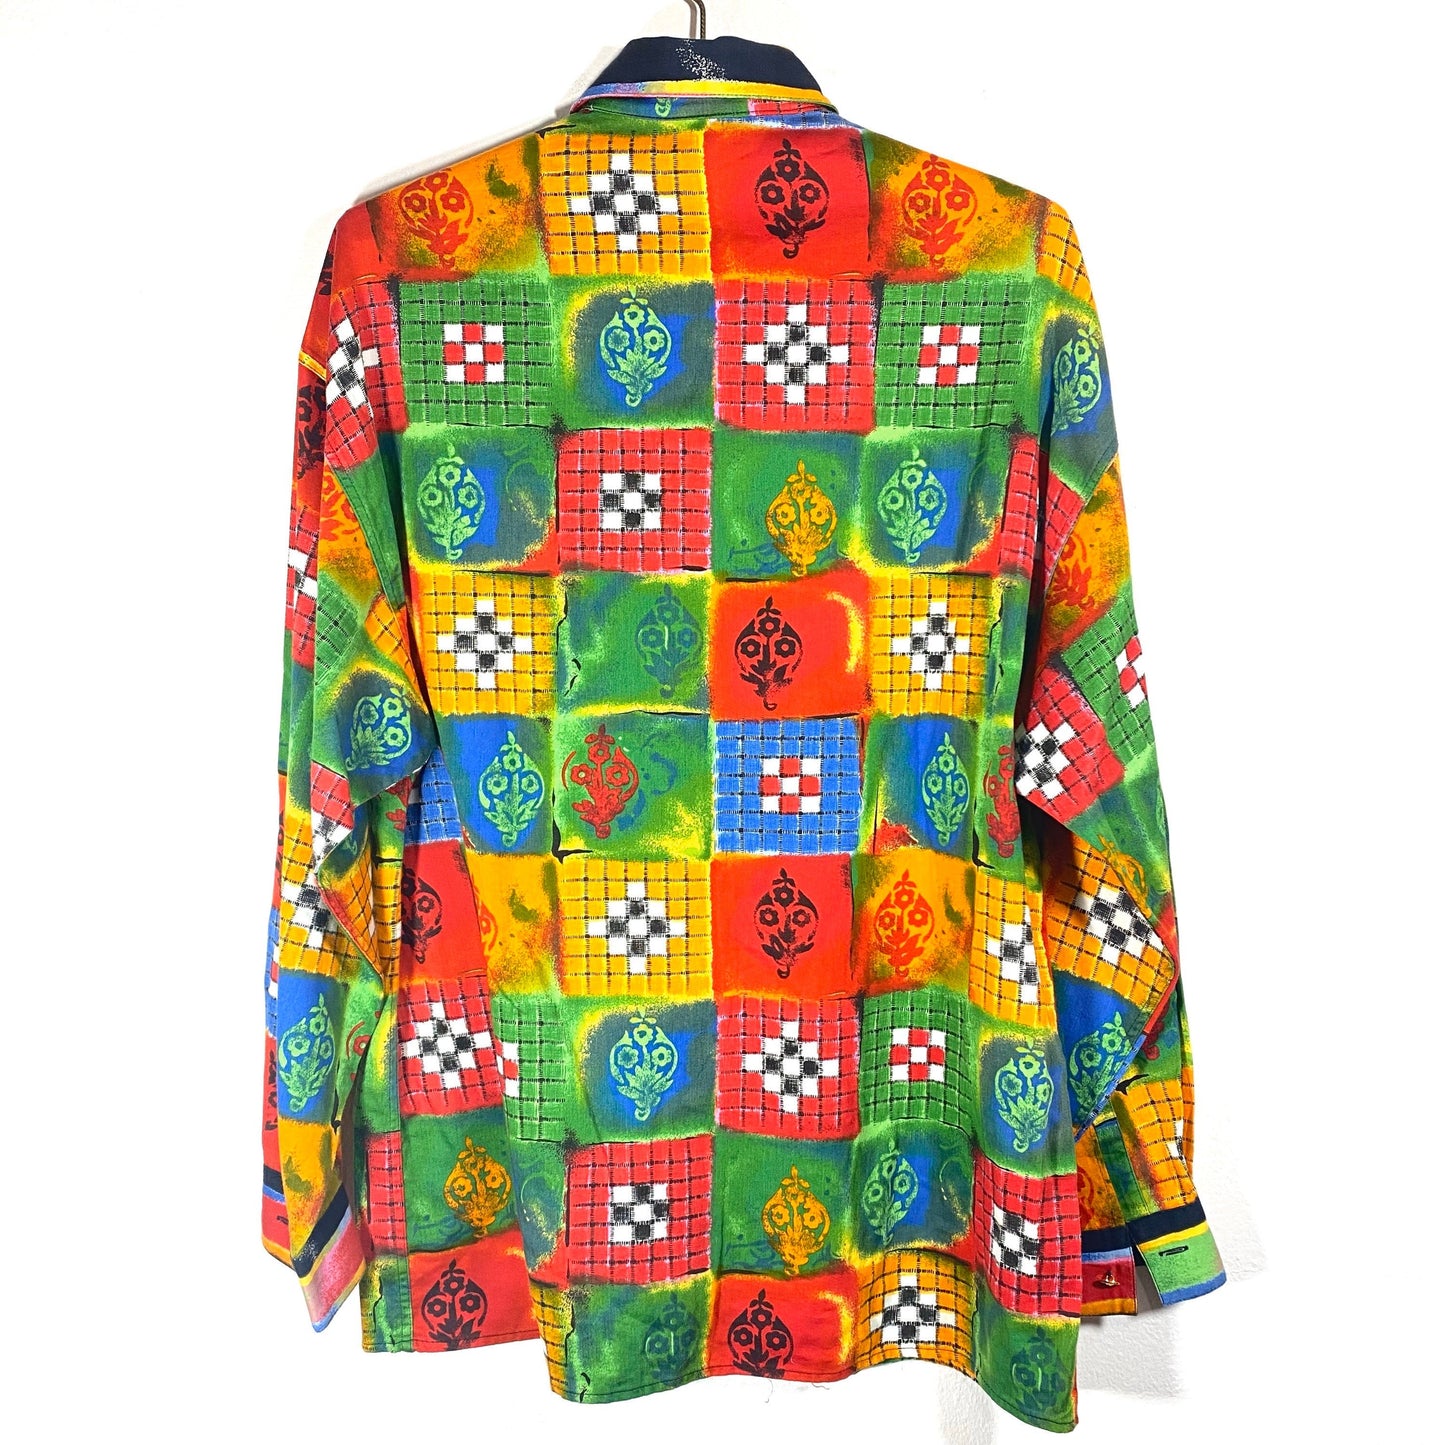 Versus Versace 90s colorful cotton shirt, checkered with batik alike print, in mint condition.